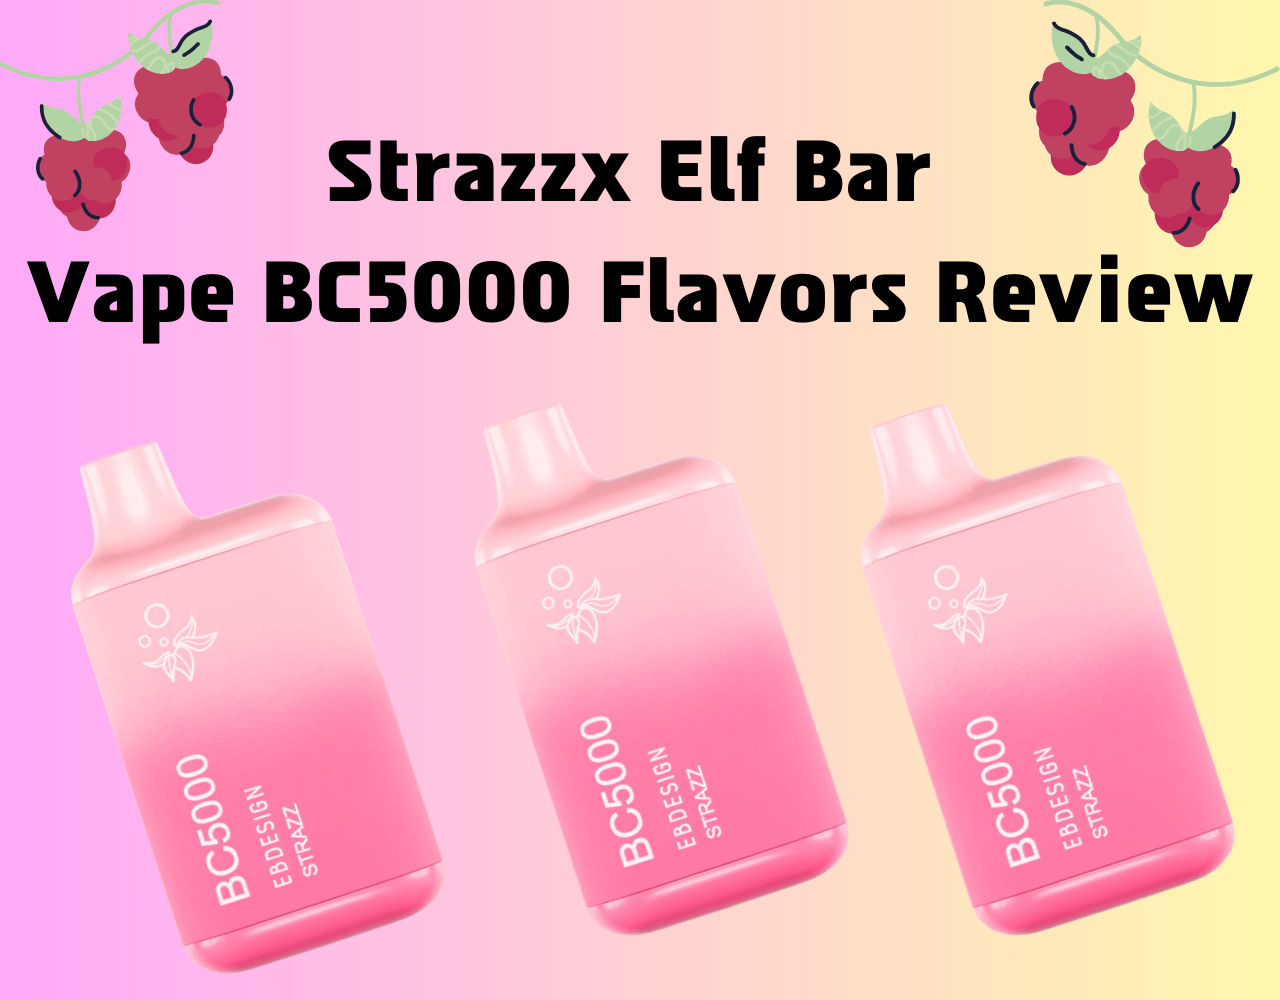 Strazzx Elf Bar Vape BC5000 Flavors Review